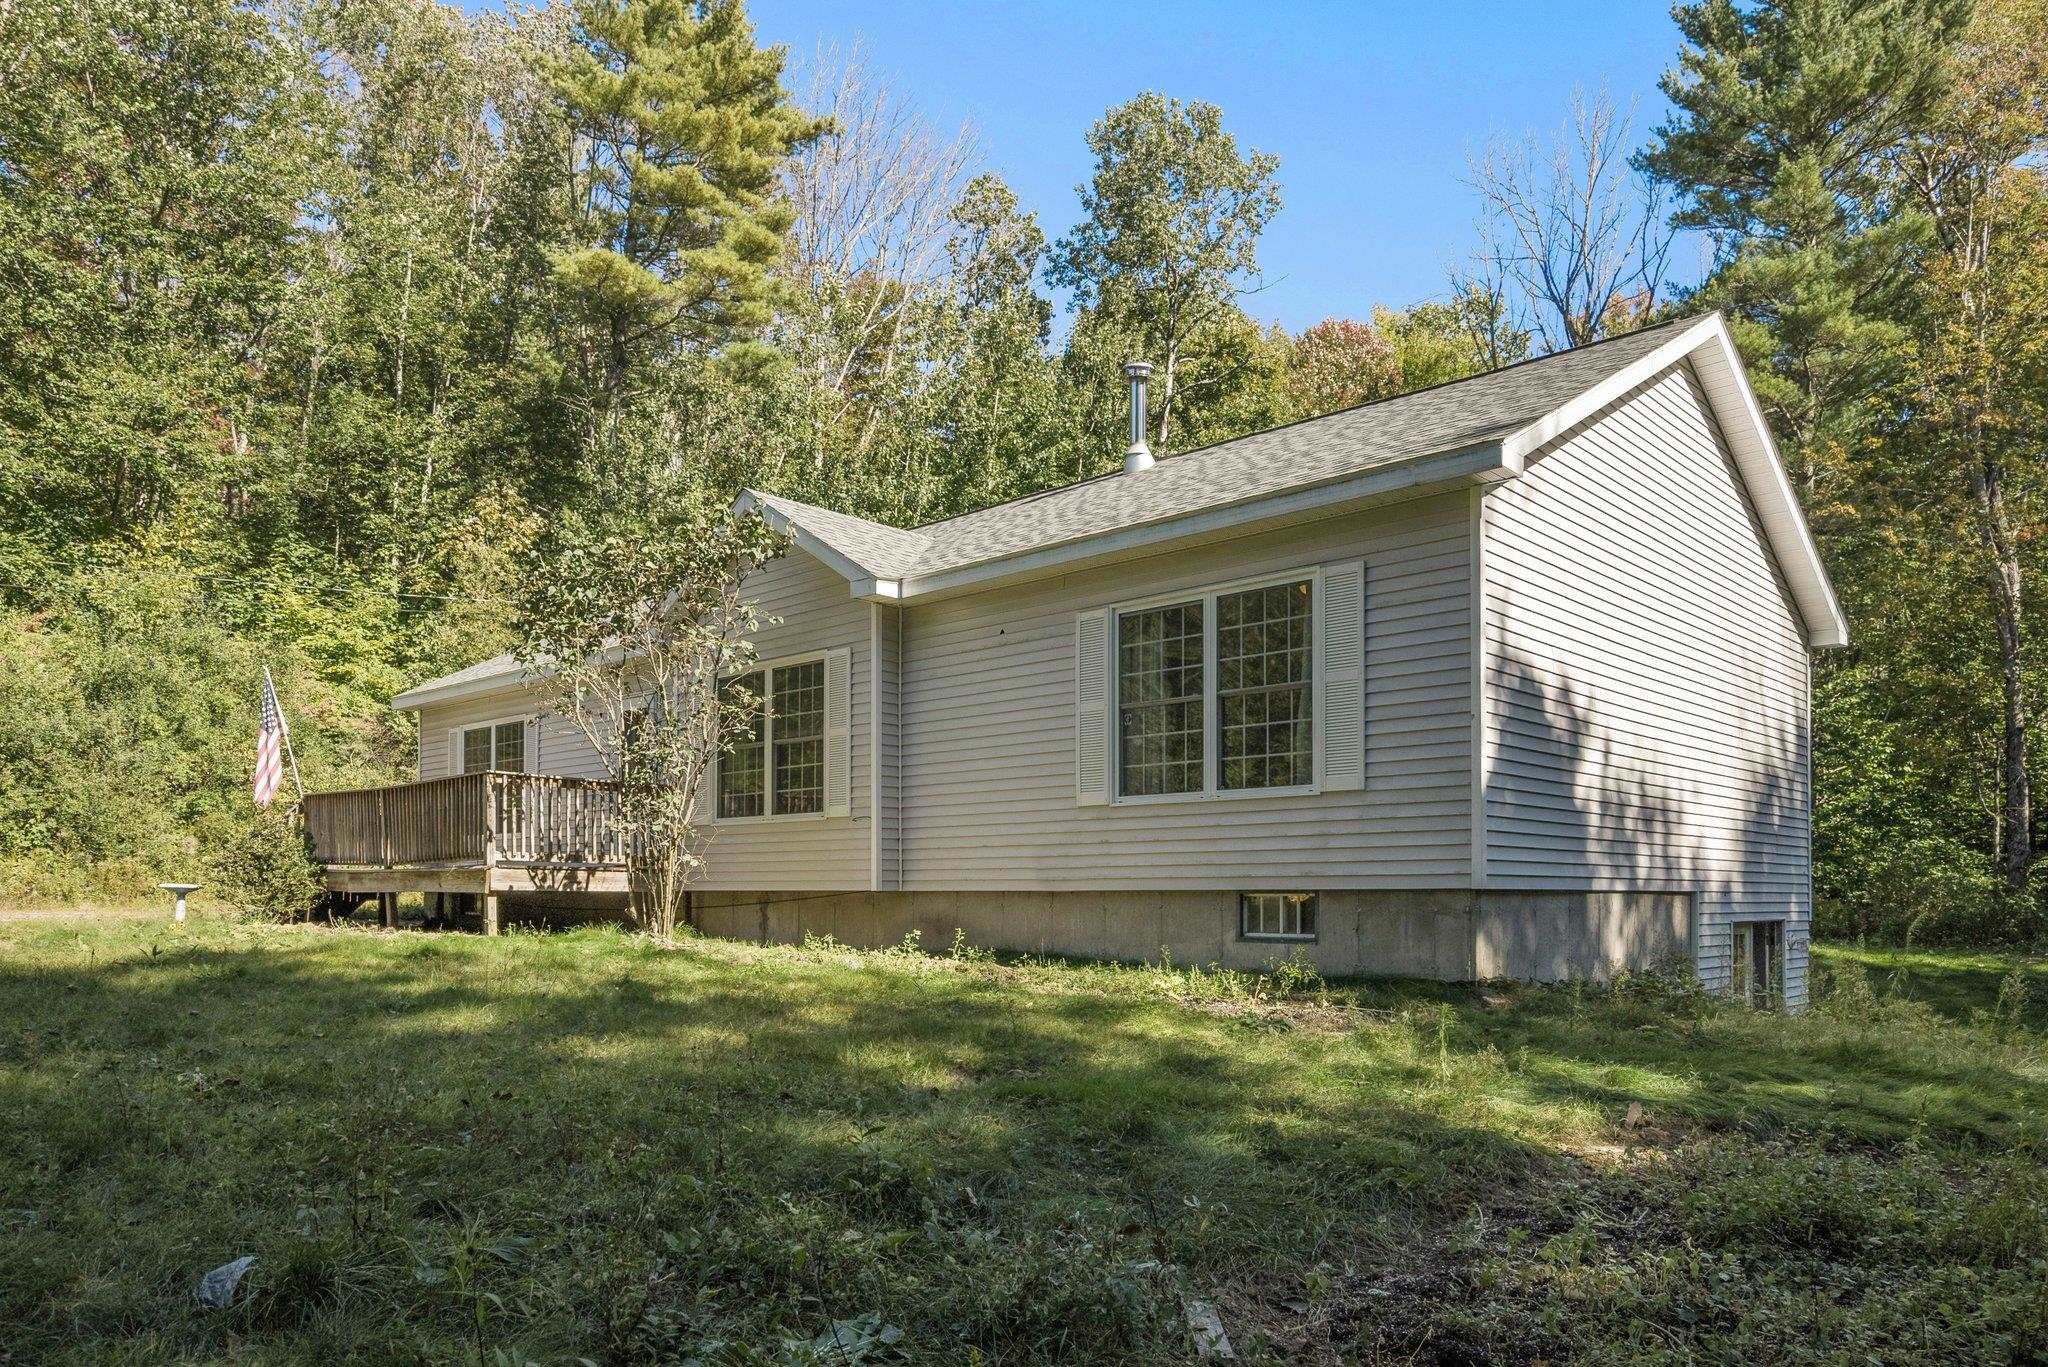 52 Halls Hill Road, Gilmanton, New Hampshire, NH 03837, 3 Bedrooms Bedrooms, 6 Rooms Rooms,2 BathroomsBathrooms,Single Family,For Sale,4931494